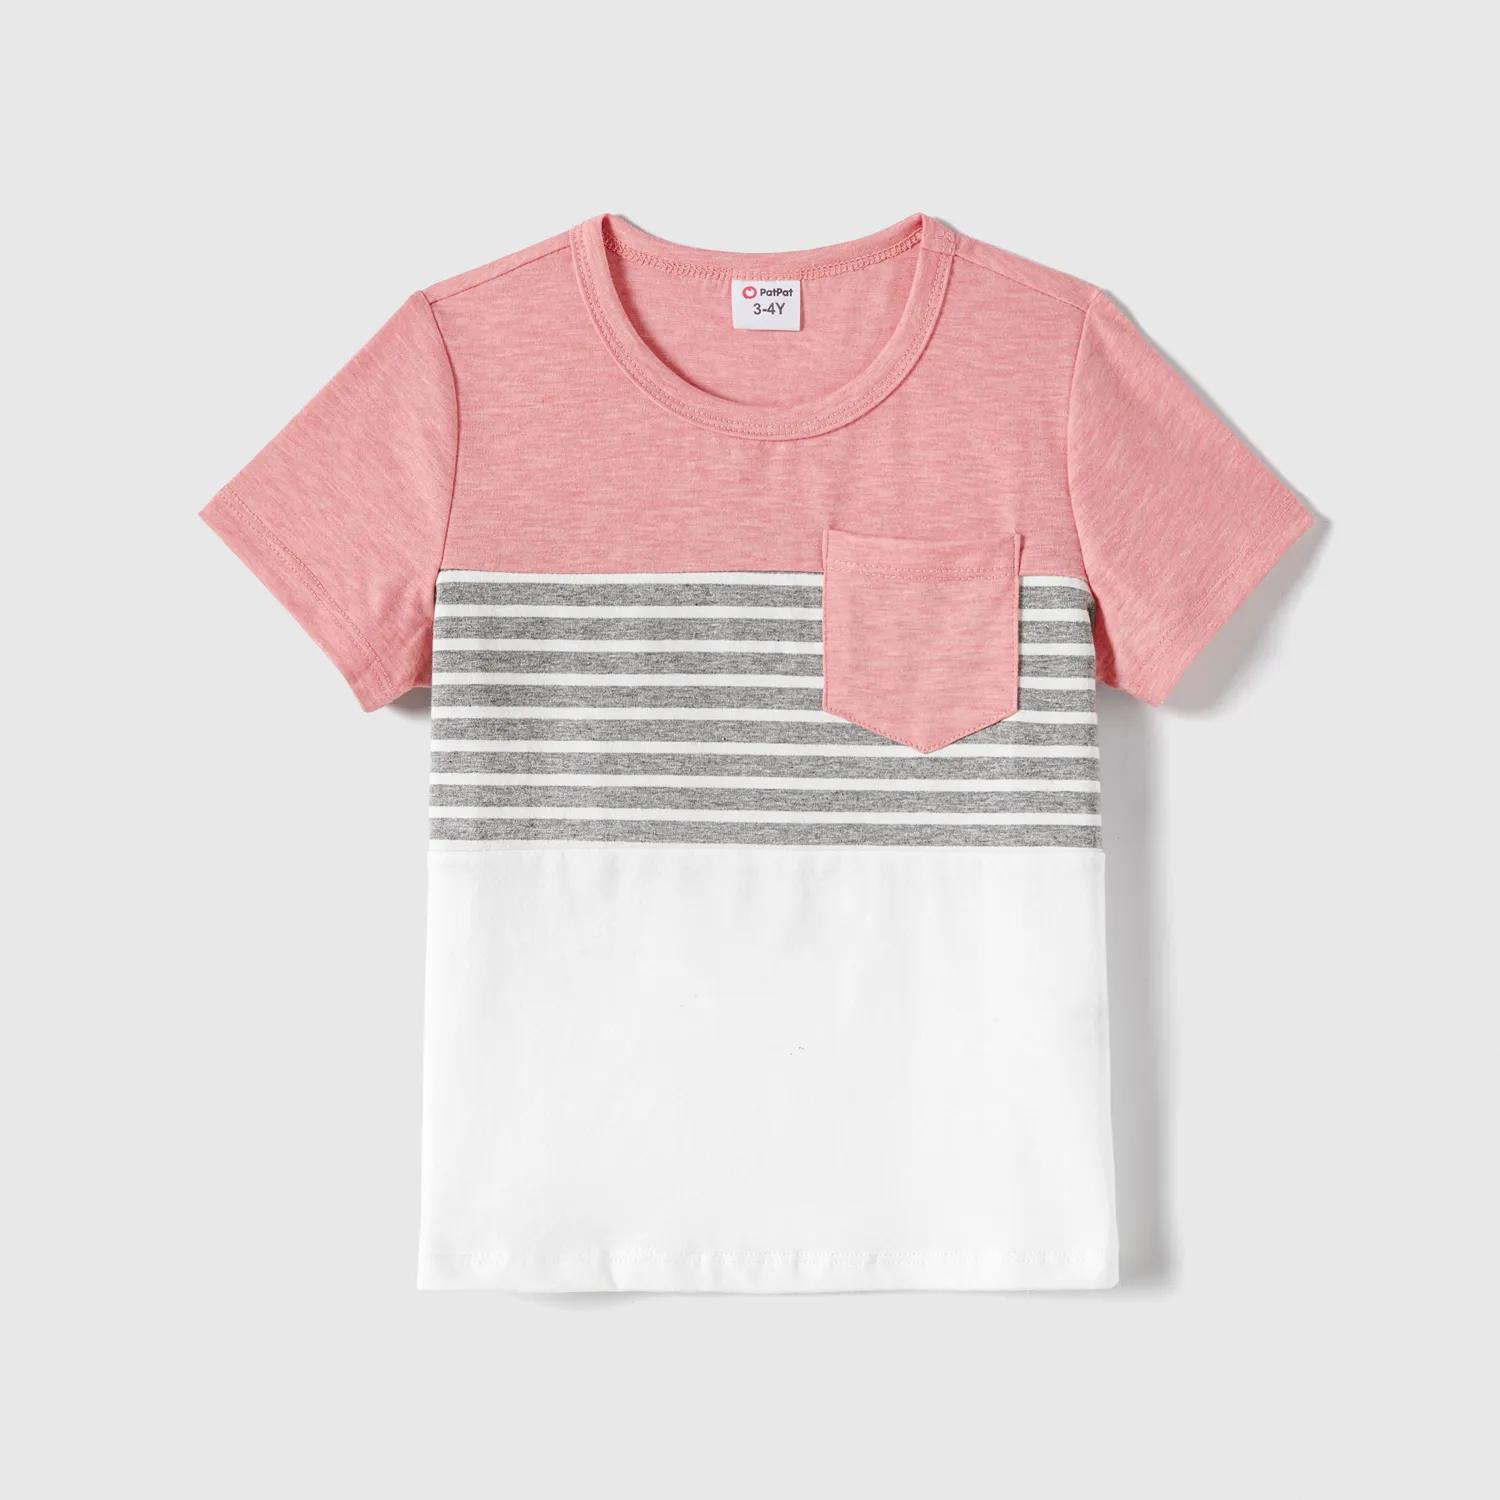 Family Matching Pink Curved Hem Short-sleeve Belted Dresses And Colorblock Striped T-shirts Sets